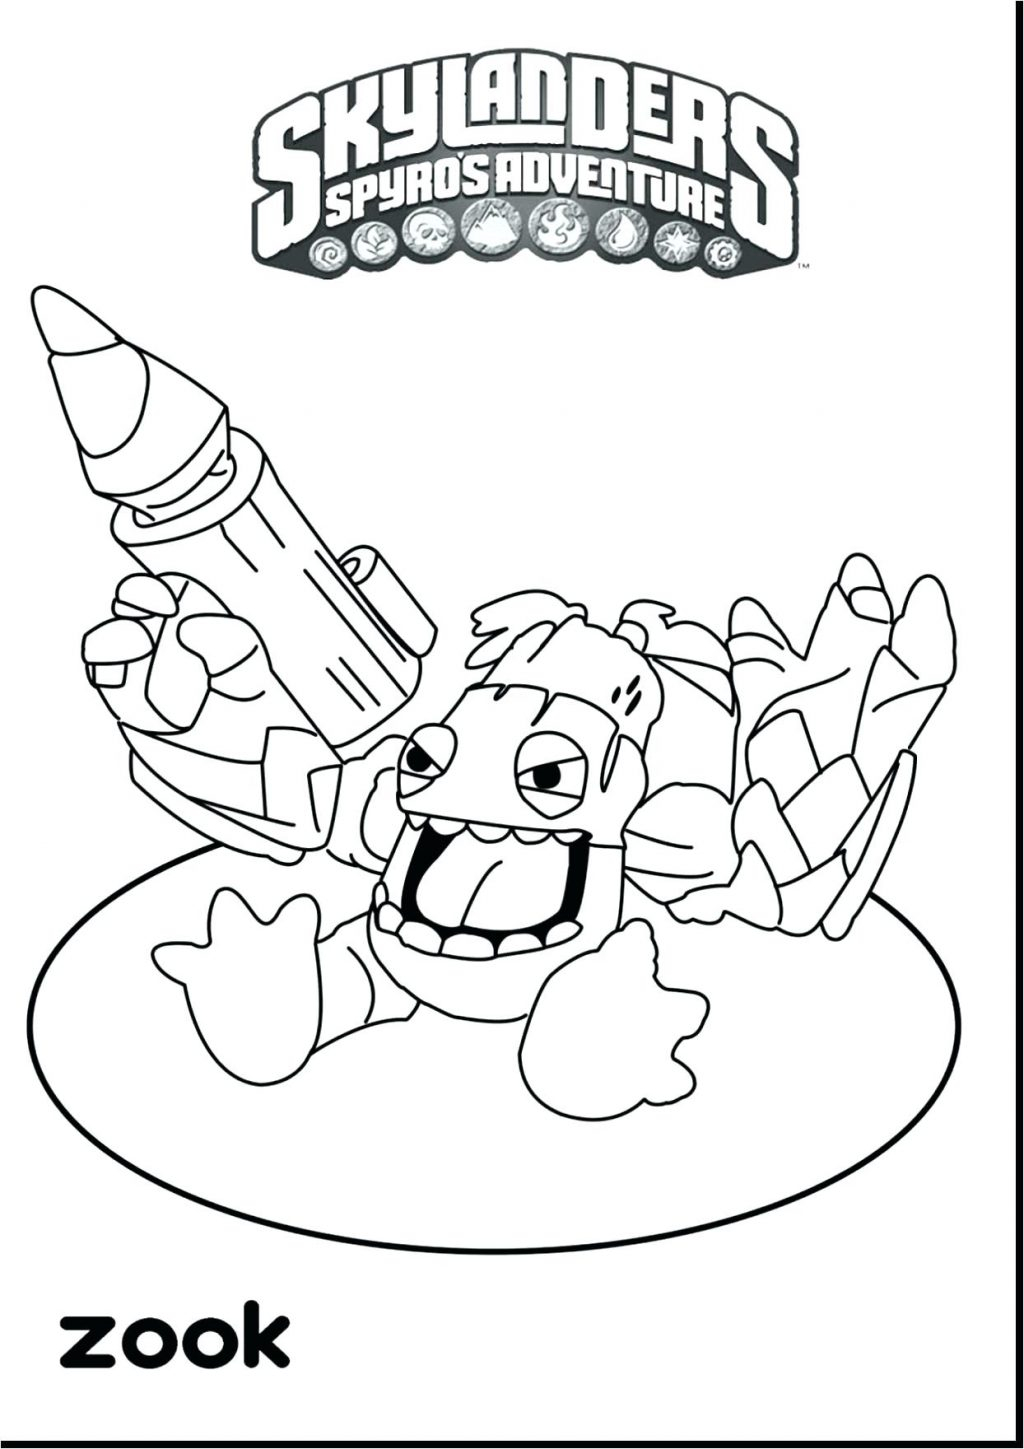 Free Custom Coloring Pages Coloring Page 51 Stunning Free Personalized Name Coloring Pages